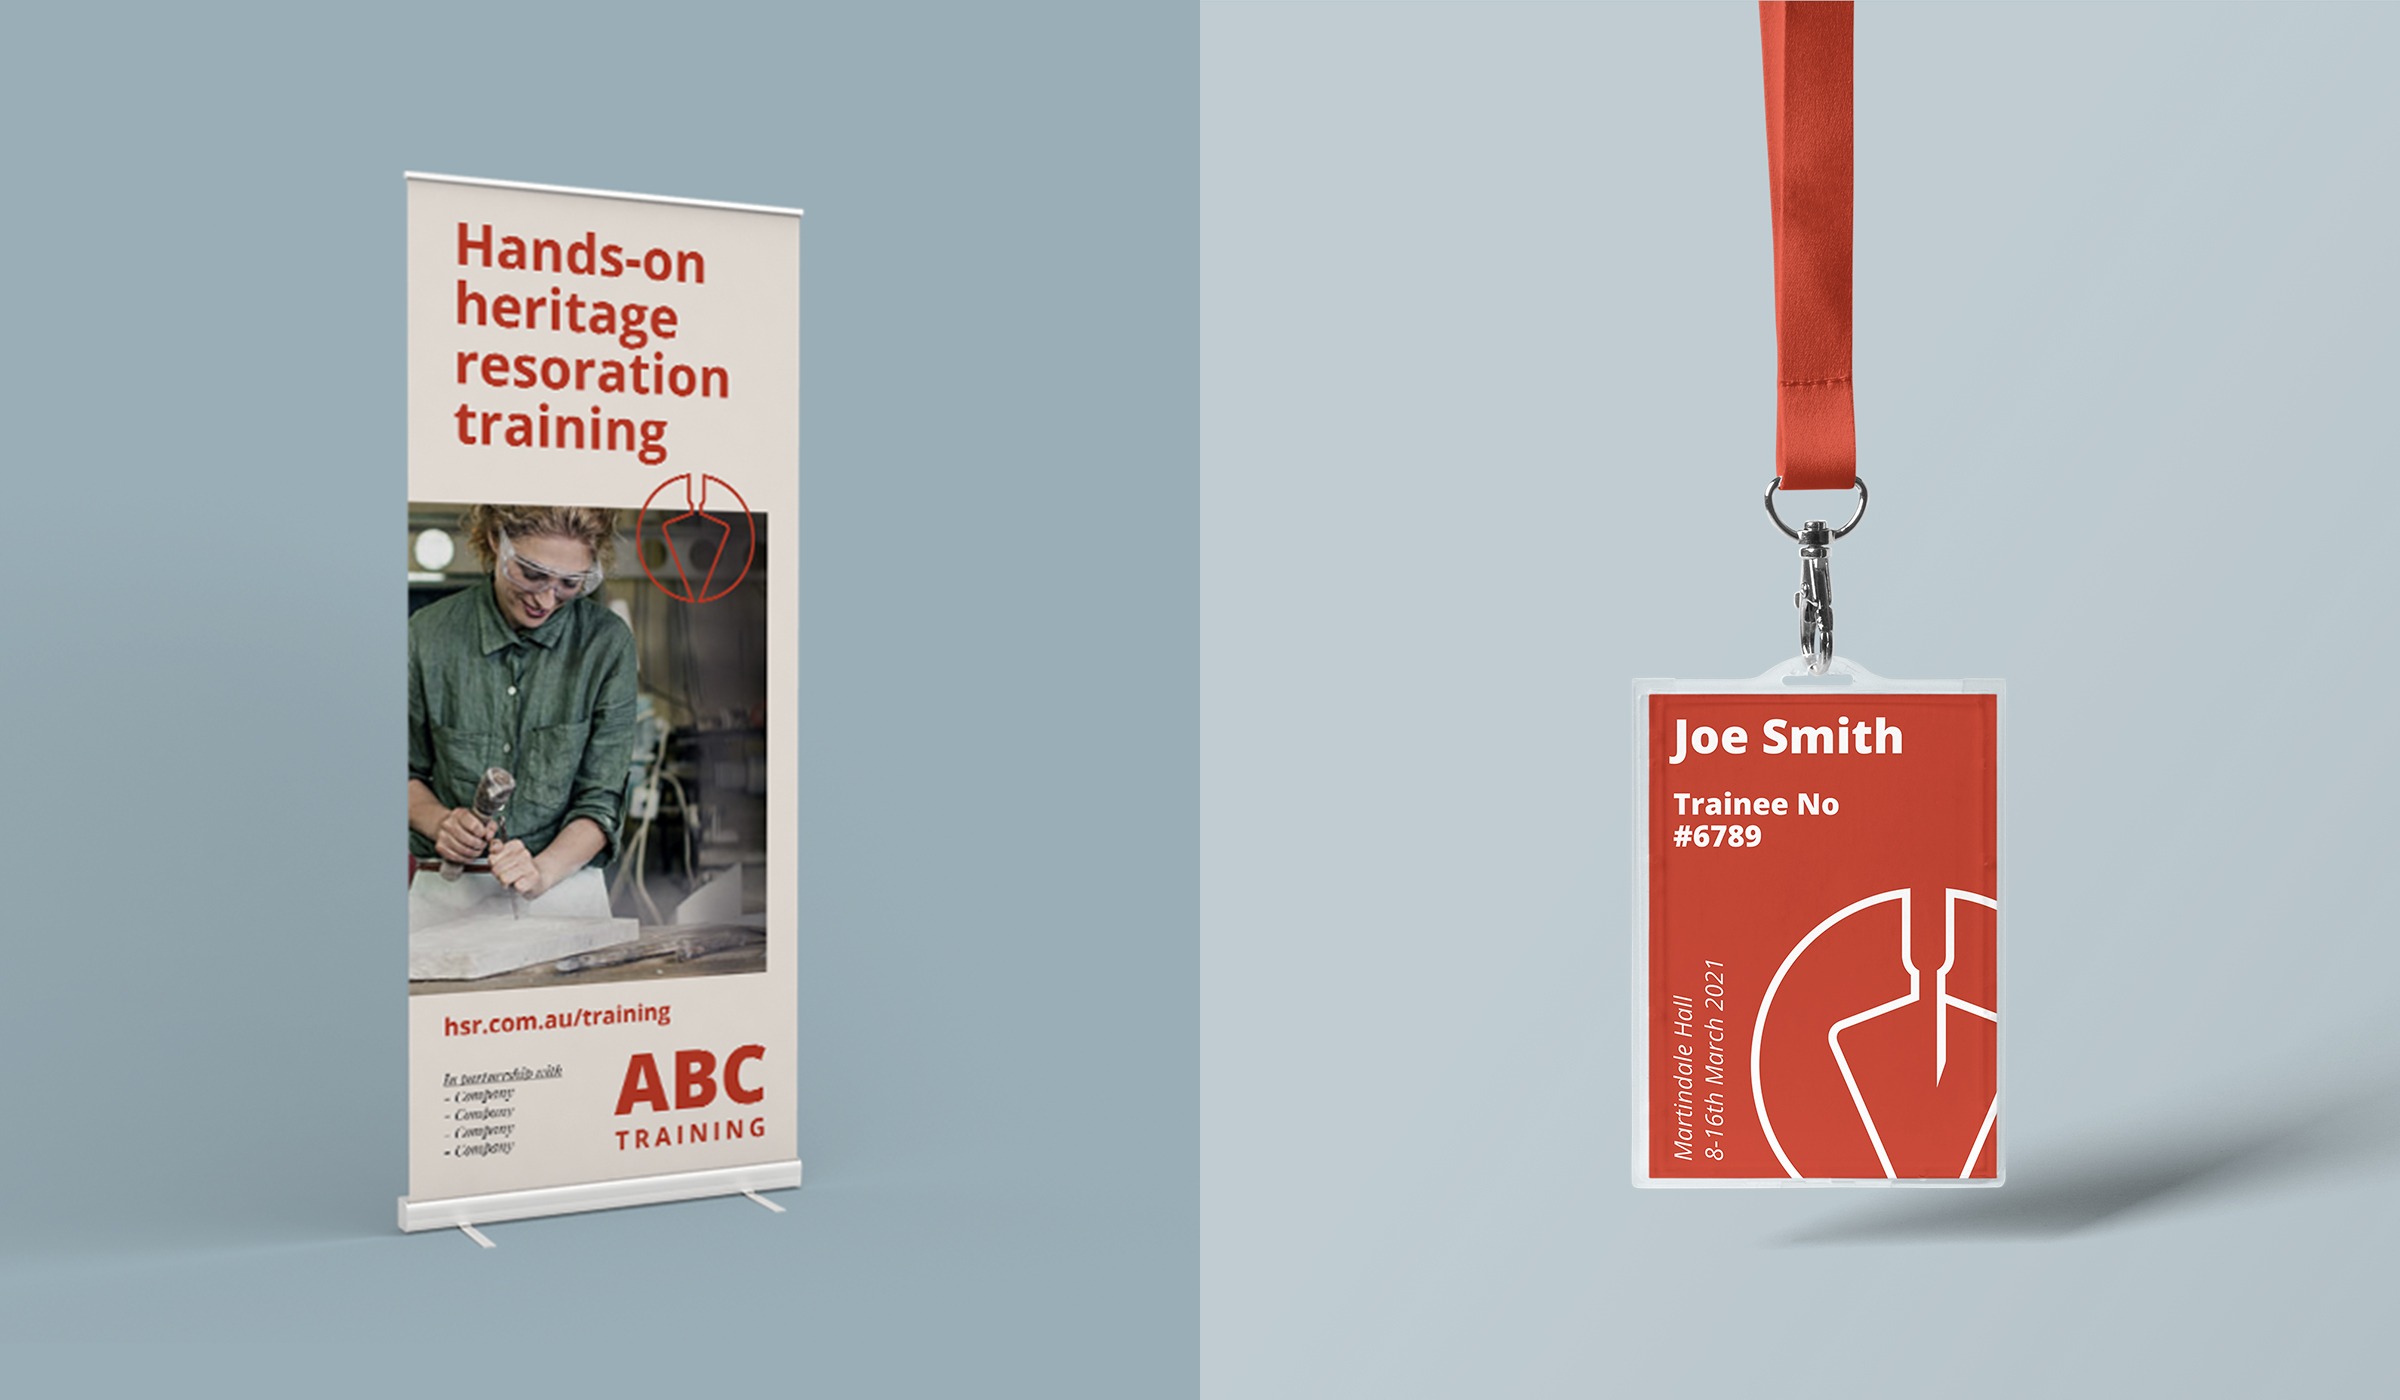 ABC Training branding collateral